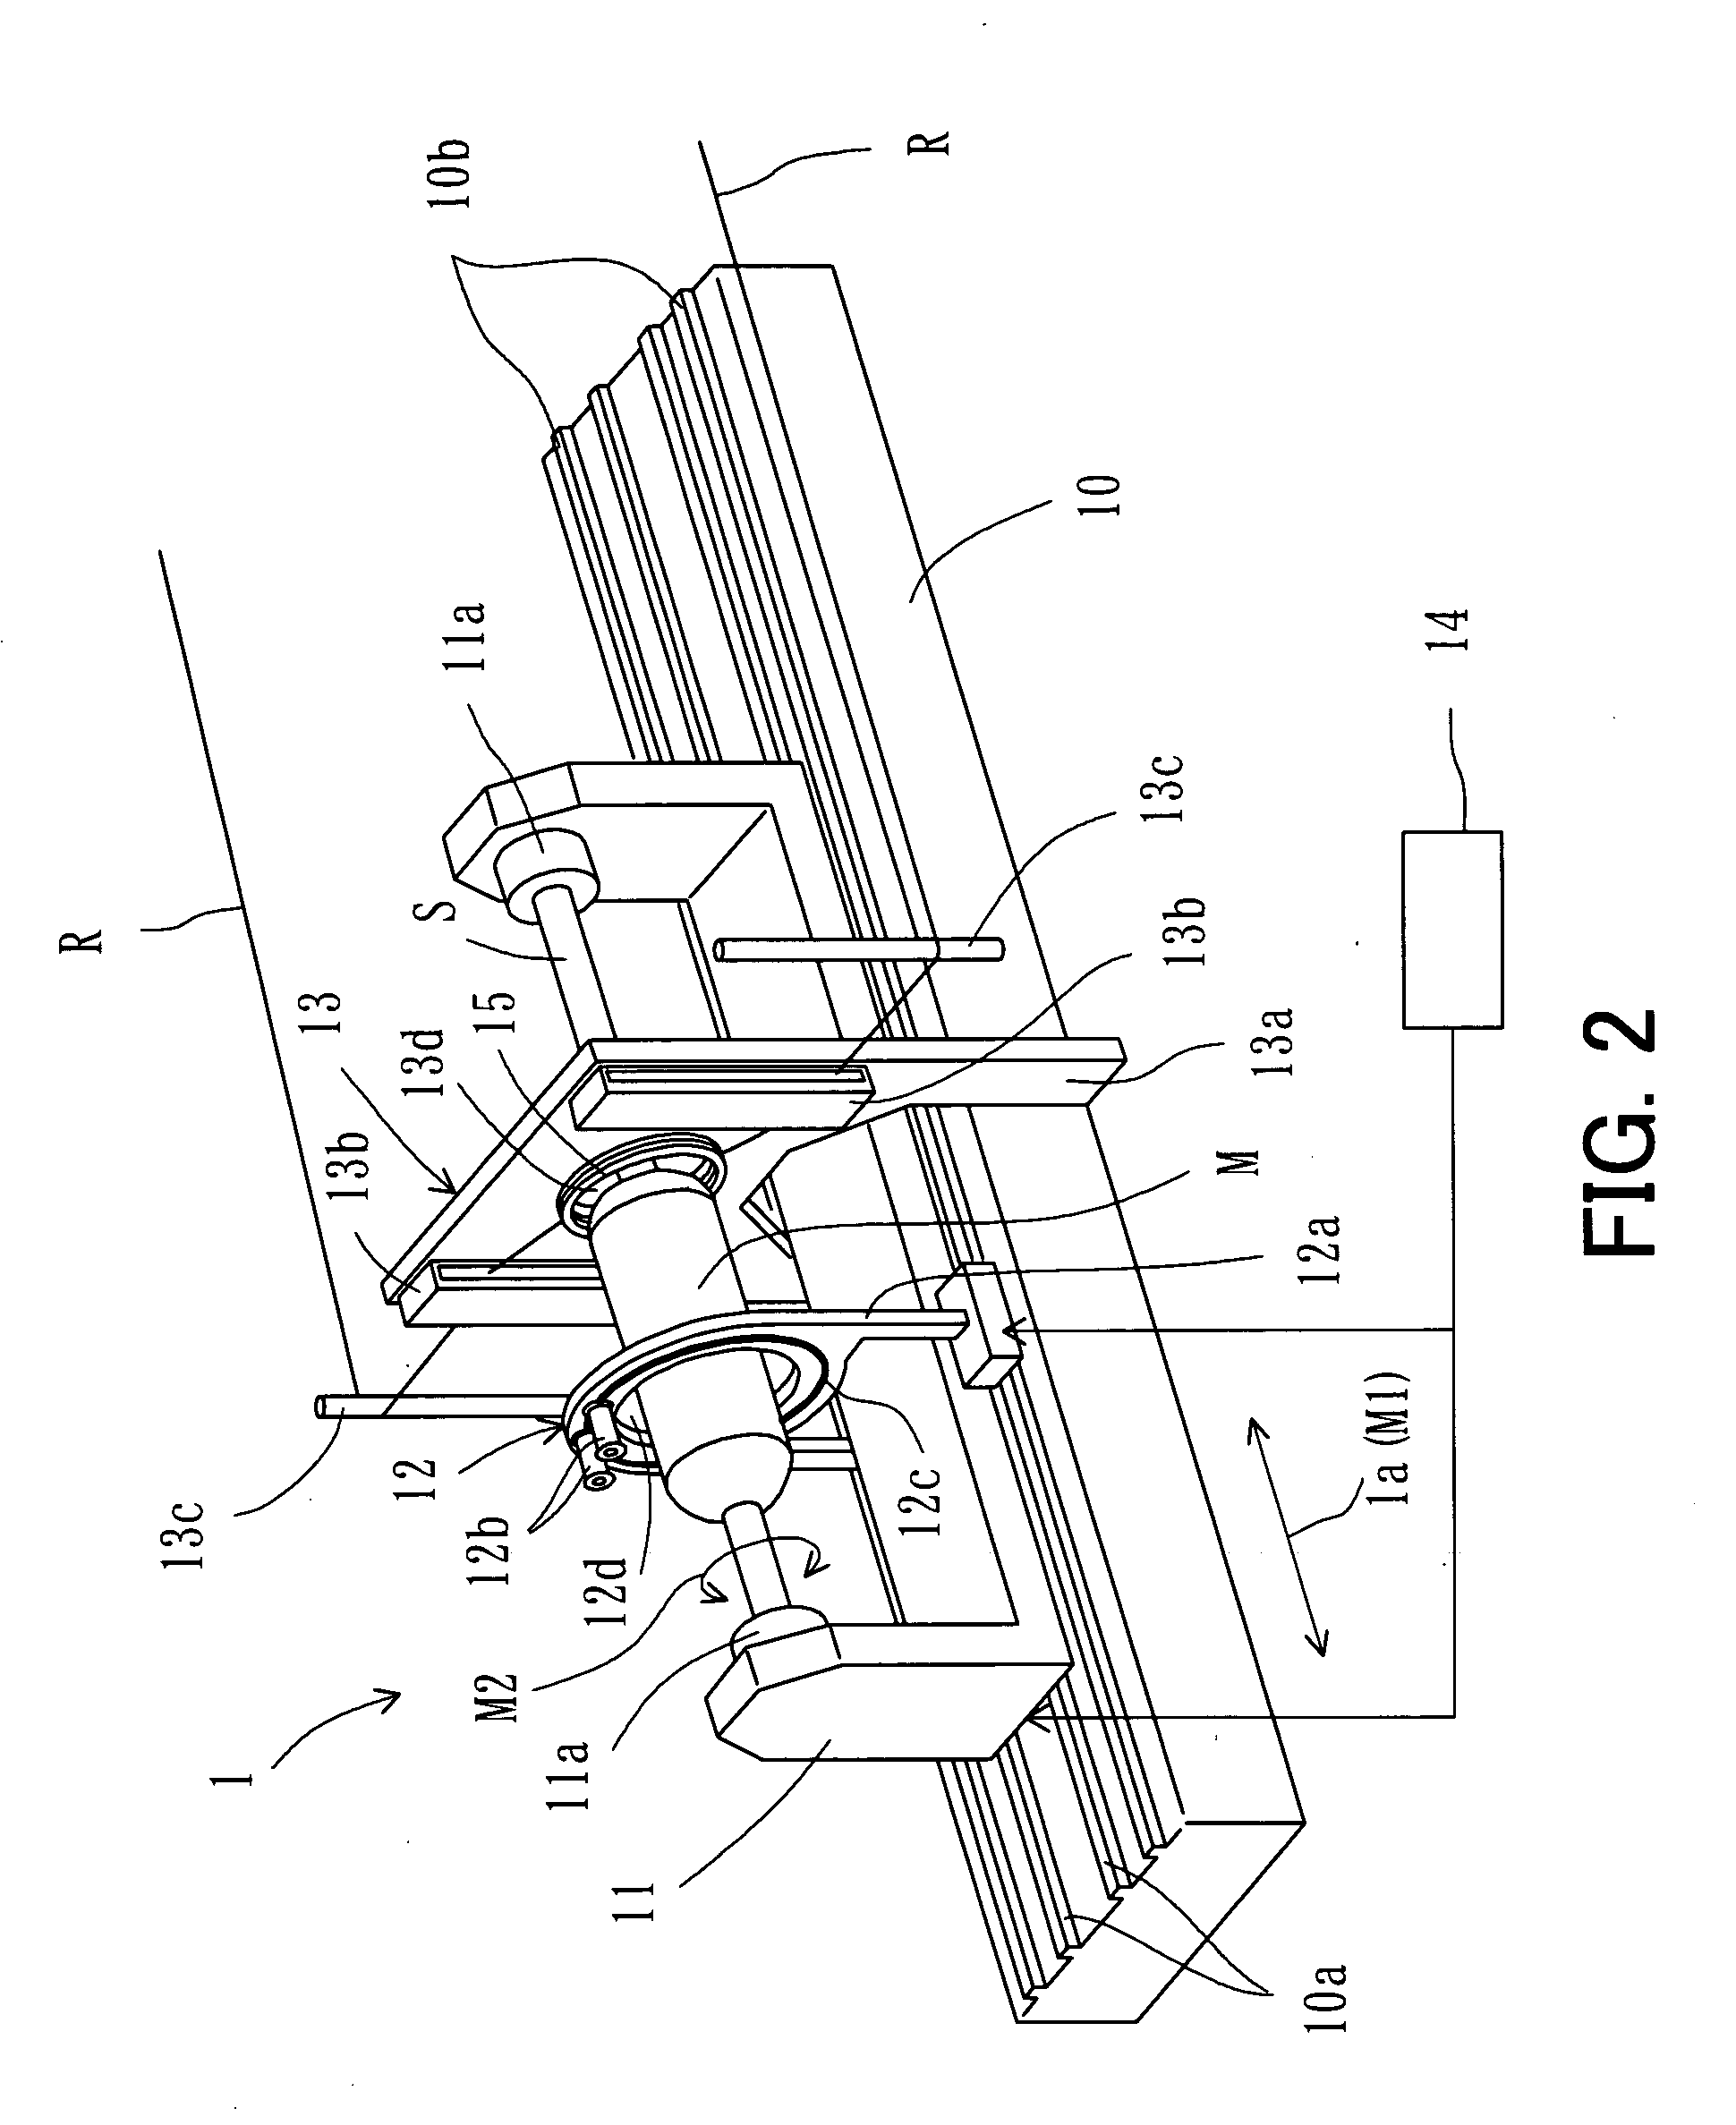 Filament winding method and apparatus